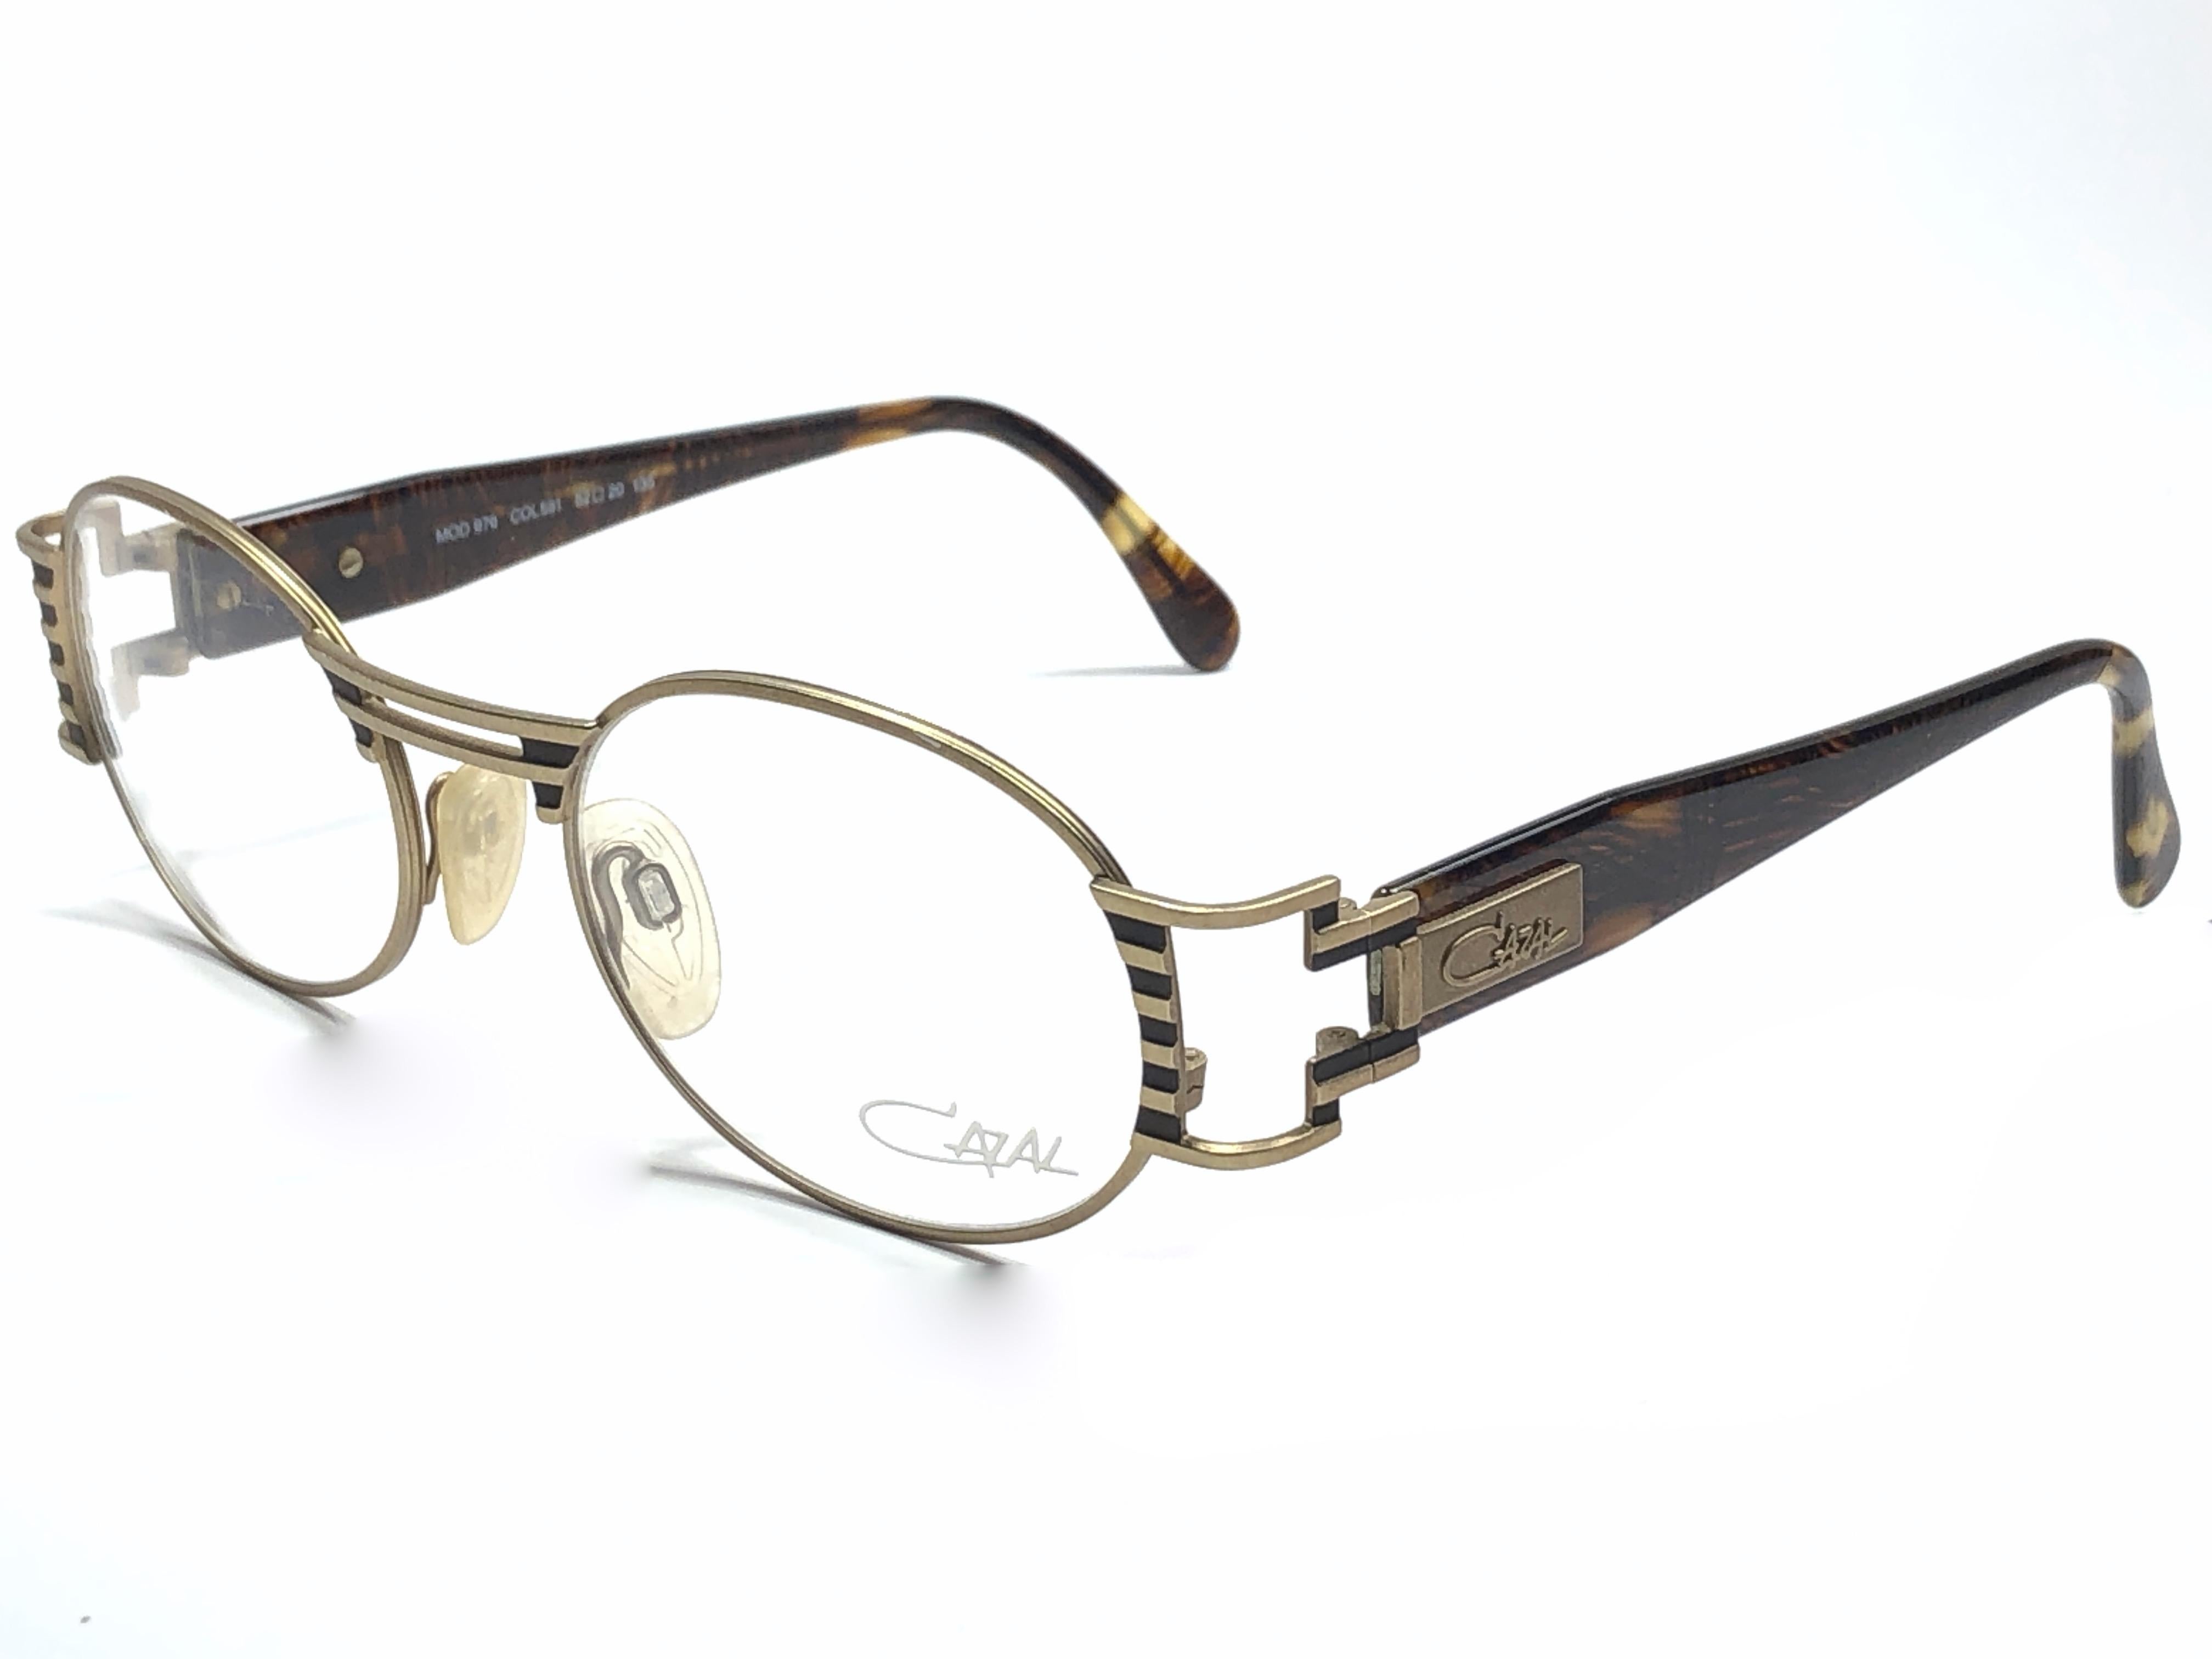 New Vintage Cazal 976 Oval Silver & Black Reading Frame 1970's Sunglasses In Excellent Condition For Sale In Baleares, Baleares